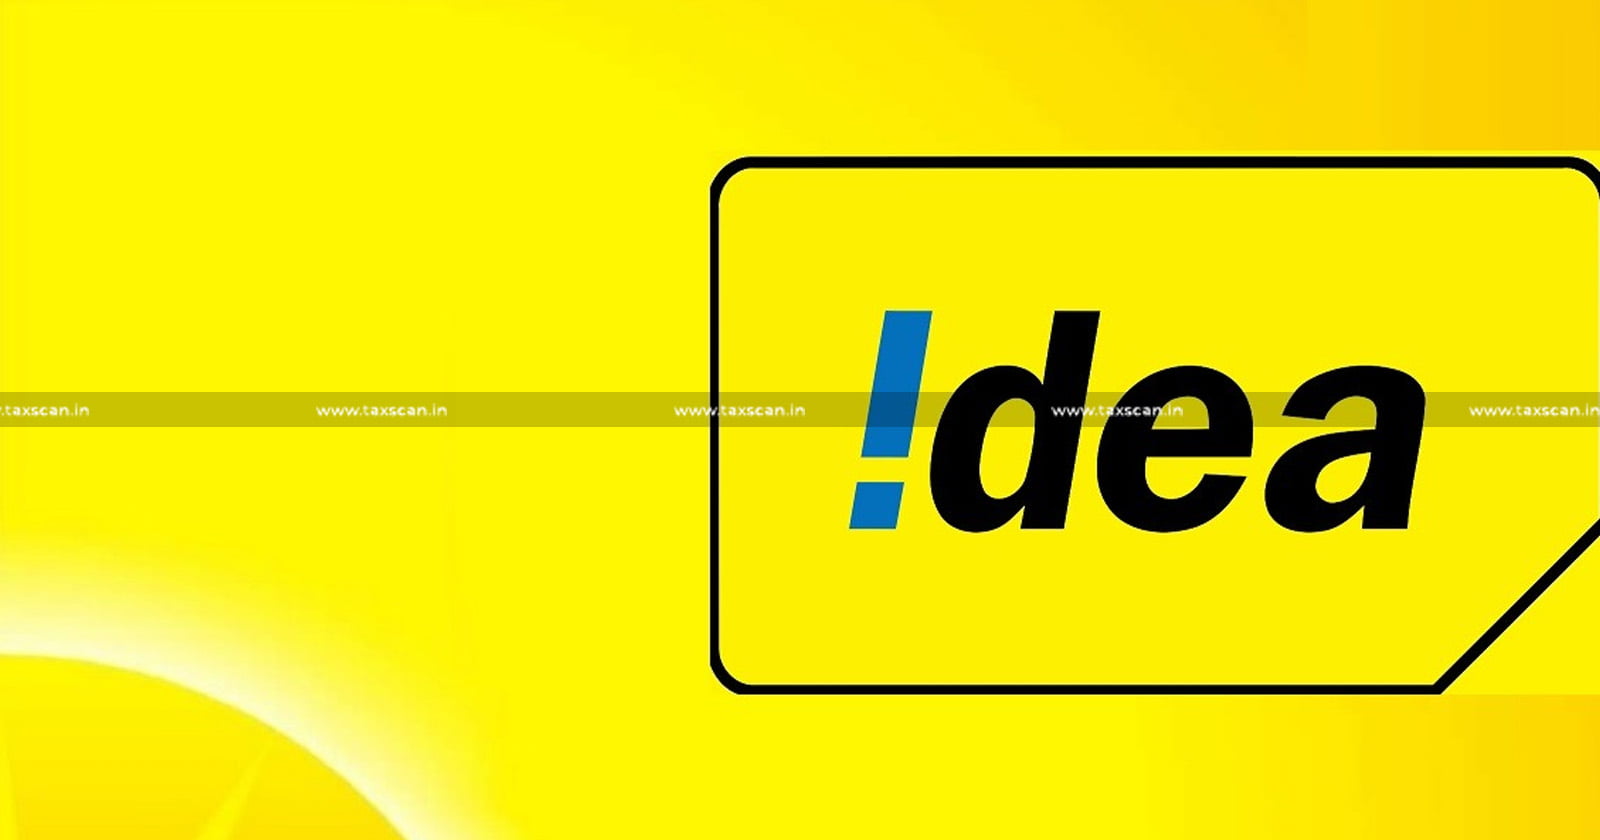 Relief to Idea - Idea - TDS - Discount to Distributors on sale of SIM Card and Prepaid Recharge Vouchers - Discount to Distributors - Discount - SIM Card - Prepaid Recharge Vouchers - ITAT -